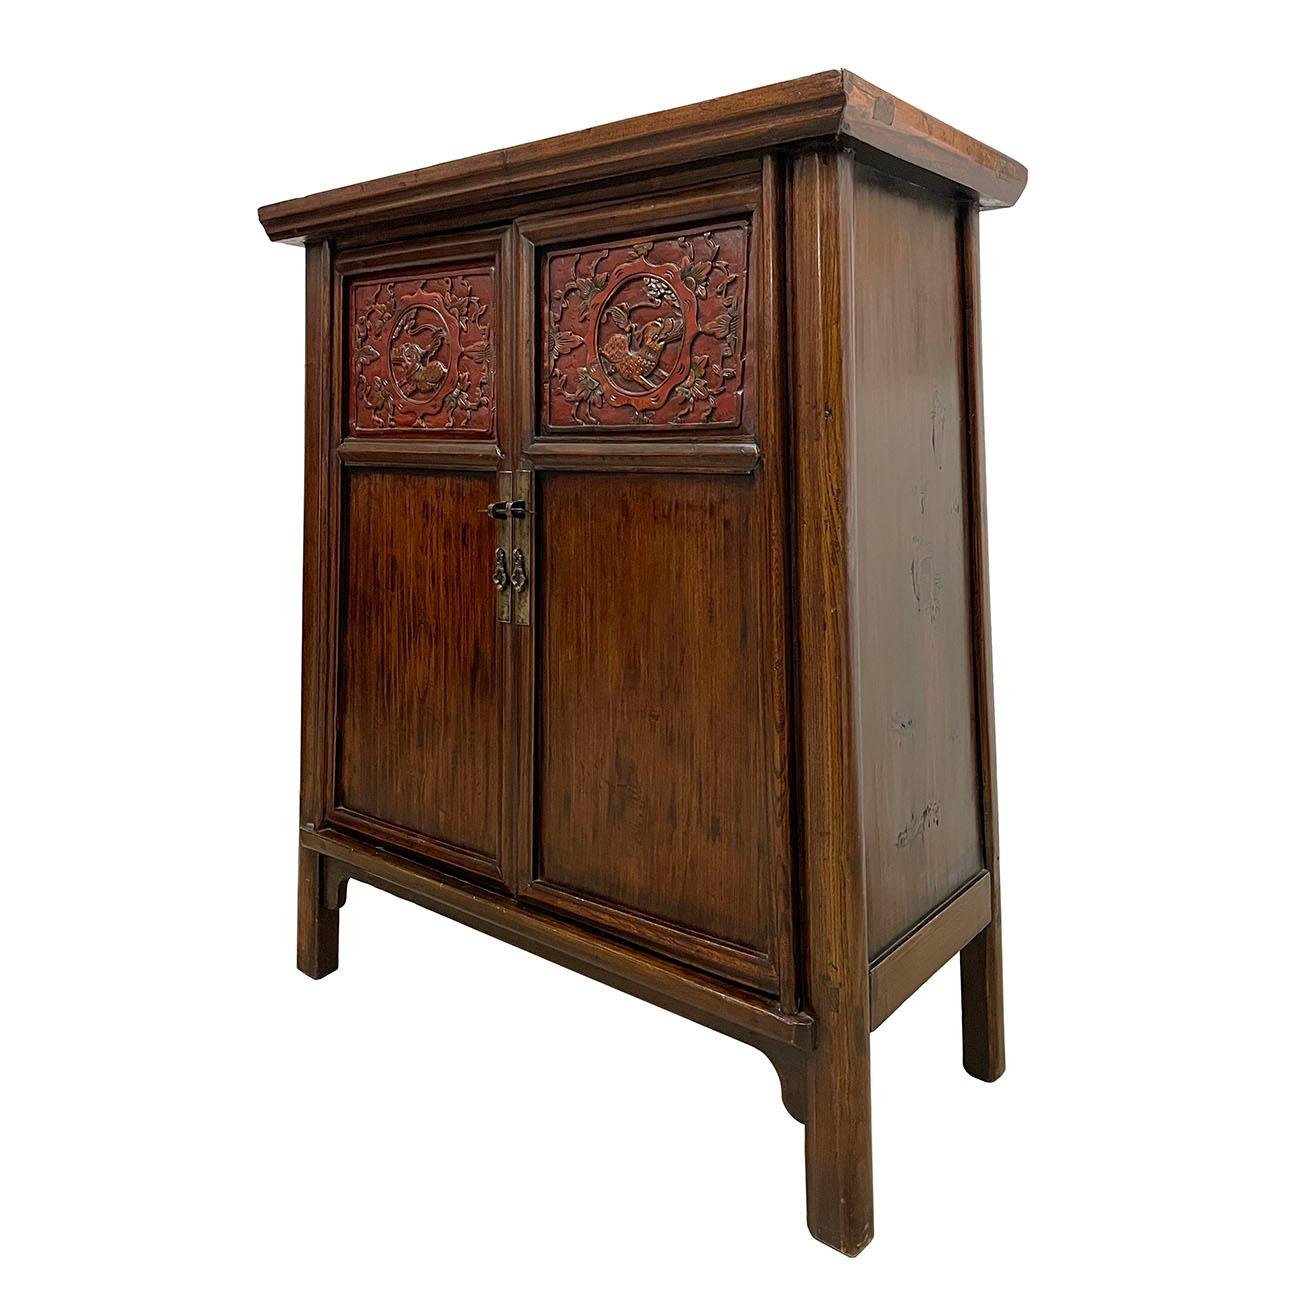 Size: 40in H x 32.5in W x 15in D?
?Door opening: 29in H x 25in W
Origin: China
Circa: 1900 - 1940
Material: Wood
Condition: Solid wood construction, antique hardware, finished on sides/back, normal age wear

Description: What a find! This is